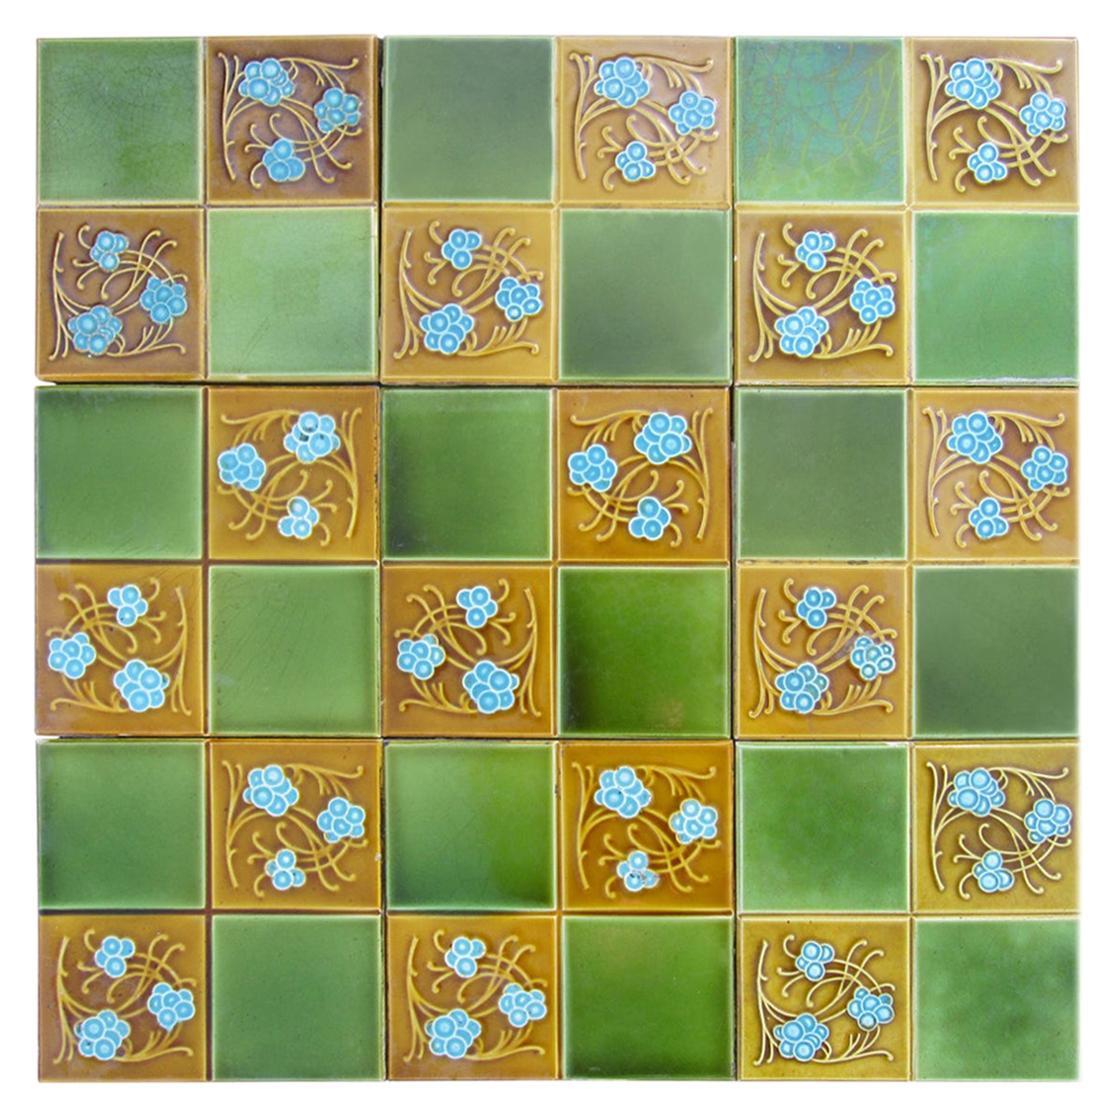 1 of the 40 amazing set handmade tiles in rich brown green and bright blue colors. Each tile is divided into four faces. Manufactured around 1920 by Gilliot Frères, Hemiksem, Belgium.
These tiles would be charming displayed on easels, framed or